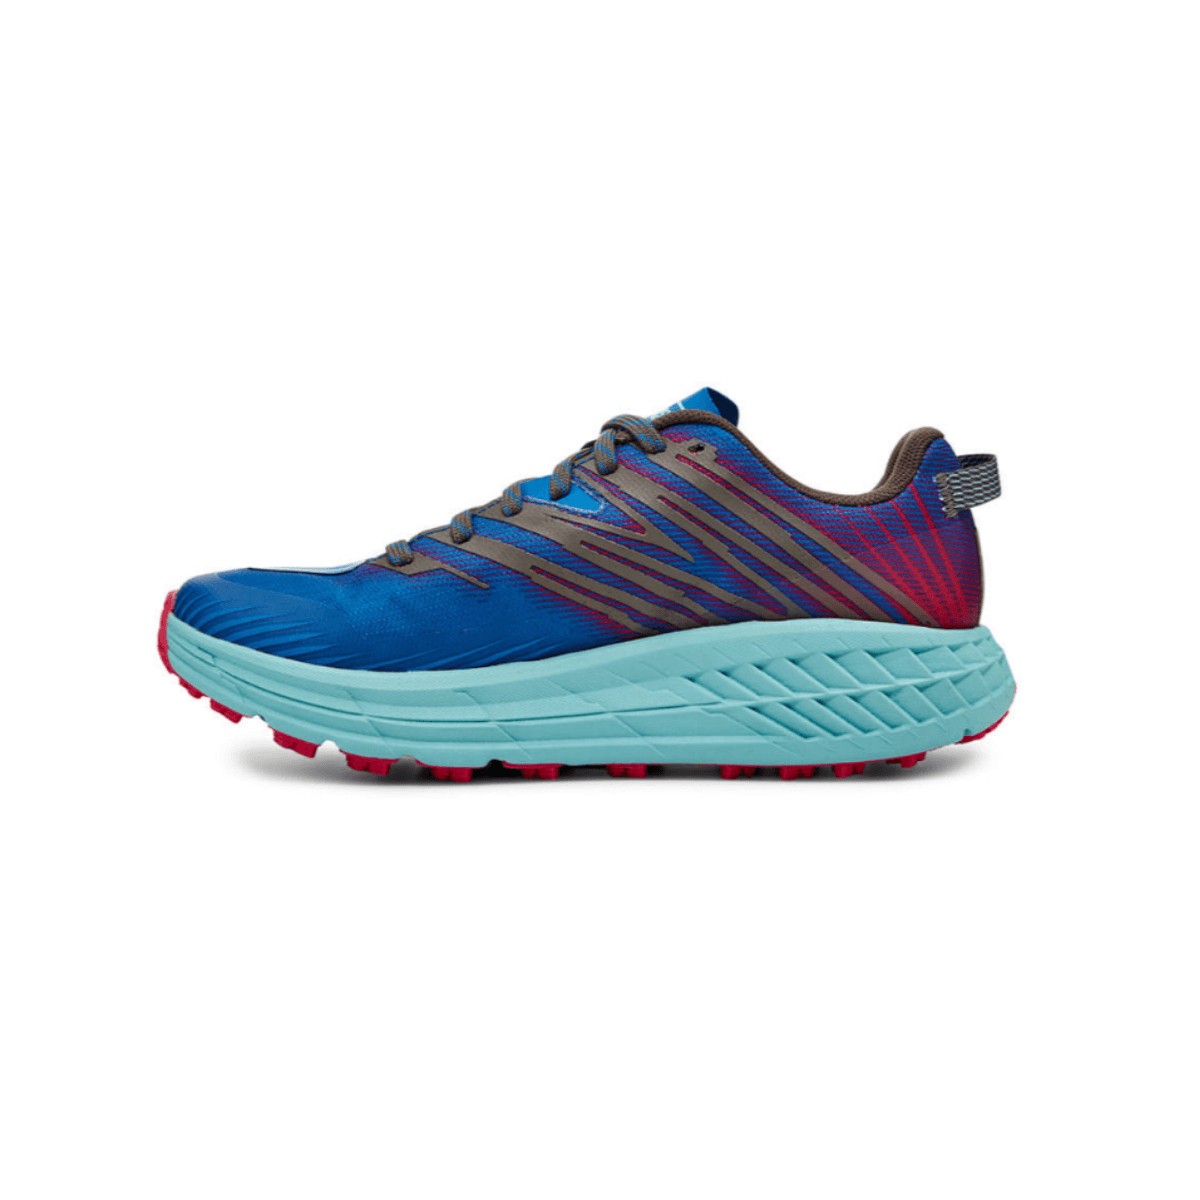 Hoka One One Speedgoat 4 Blue Red Turquoise PV20 Women's Shoes